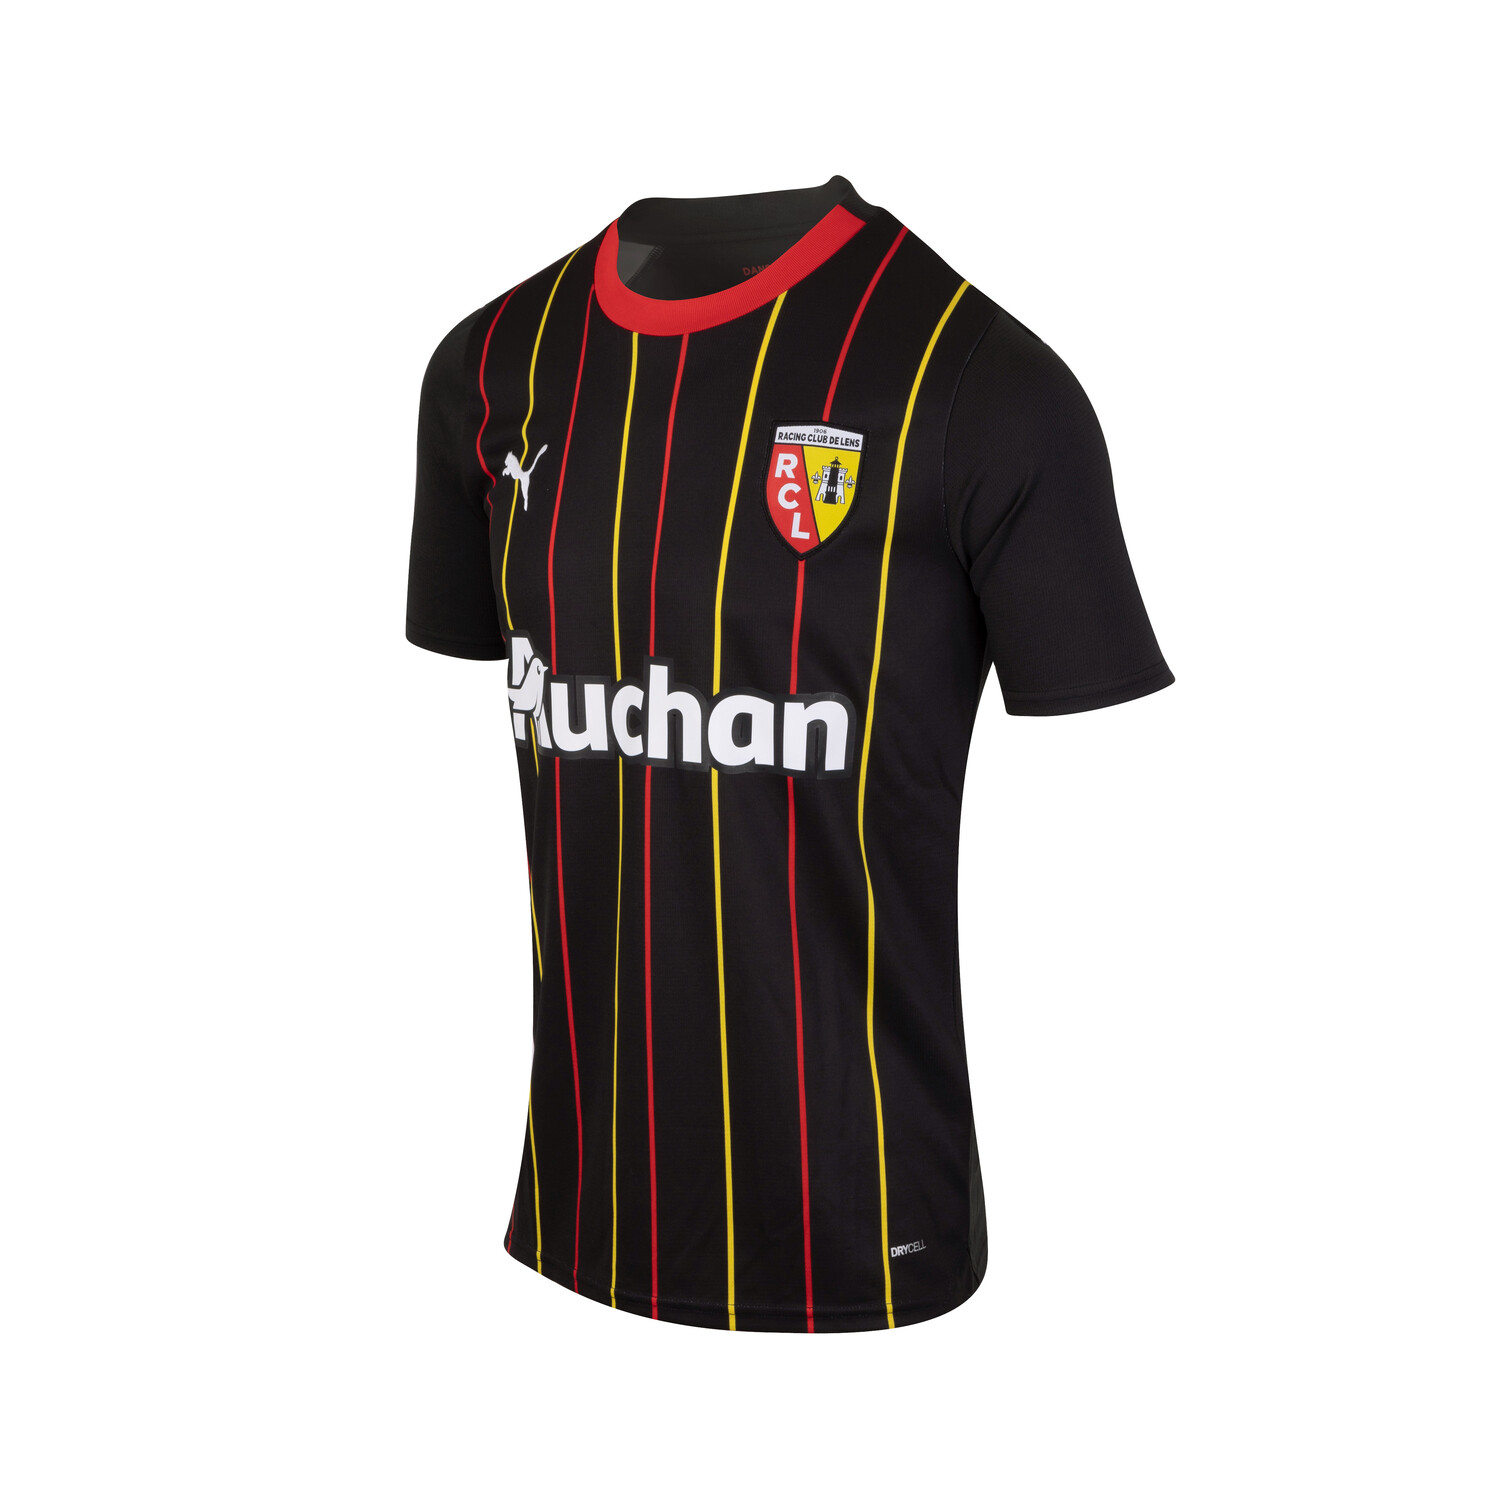 Maillot Away 23/24 RC Lens Homme, red